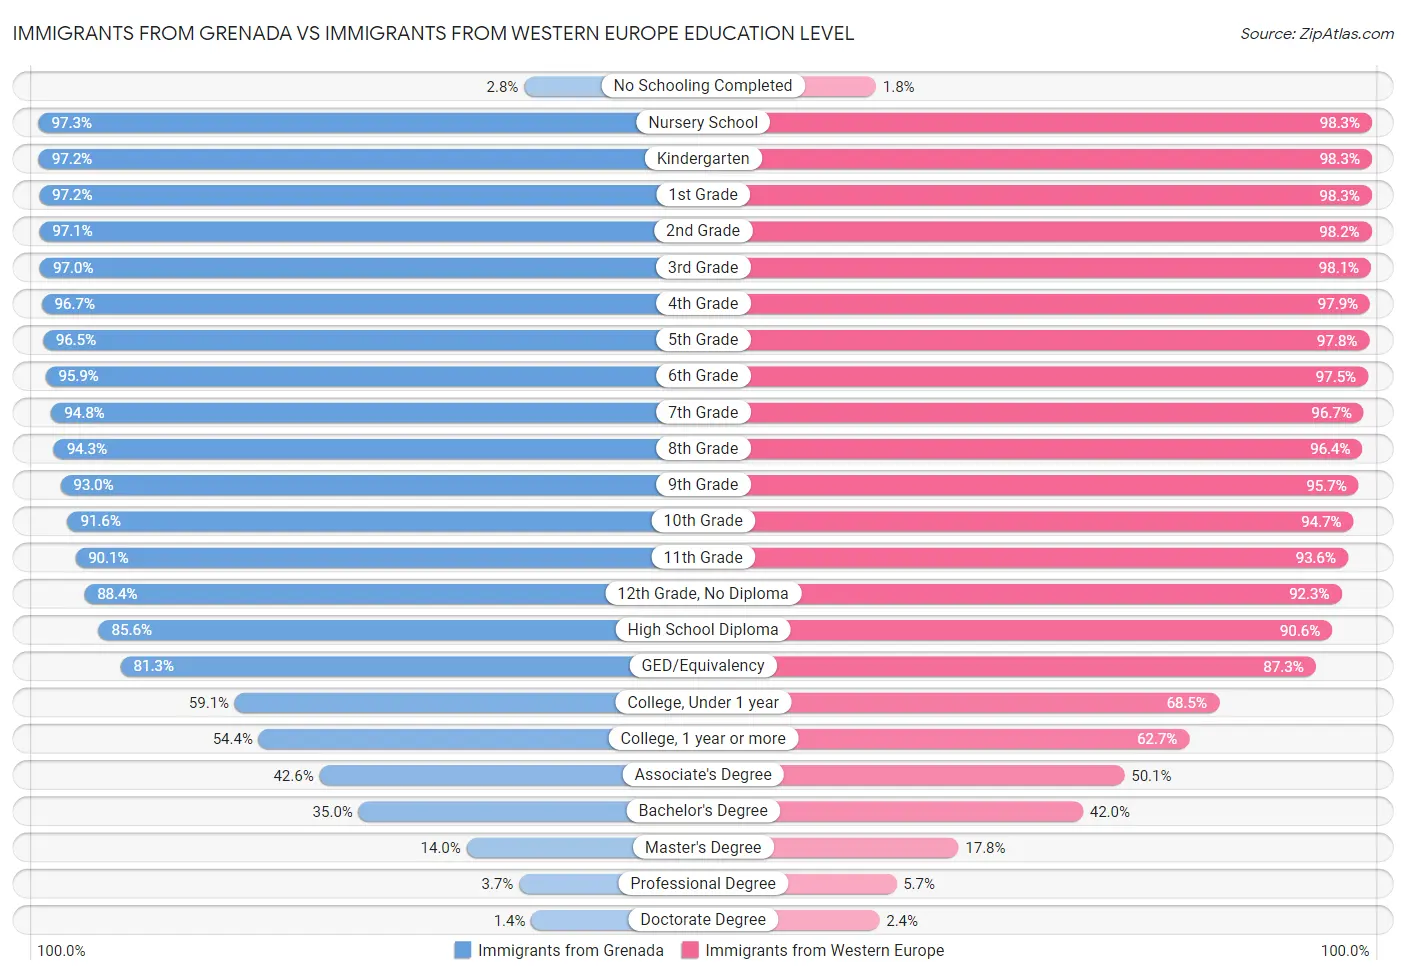 Immigrants from Grenada vs Immigrants from Western Europe Education Level